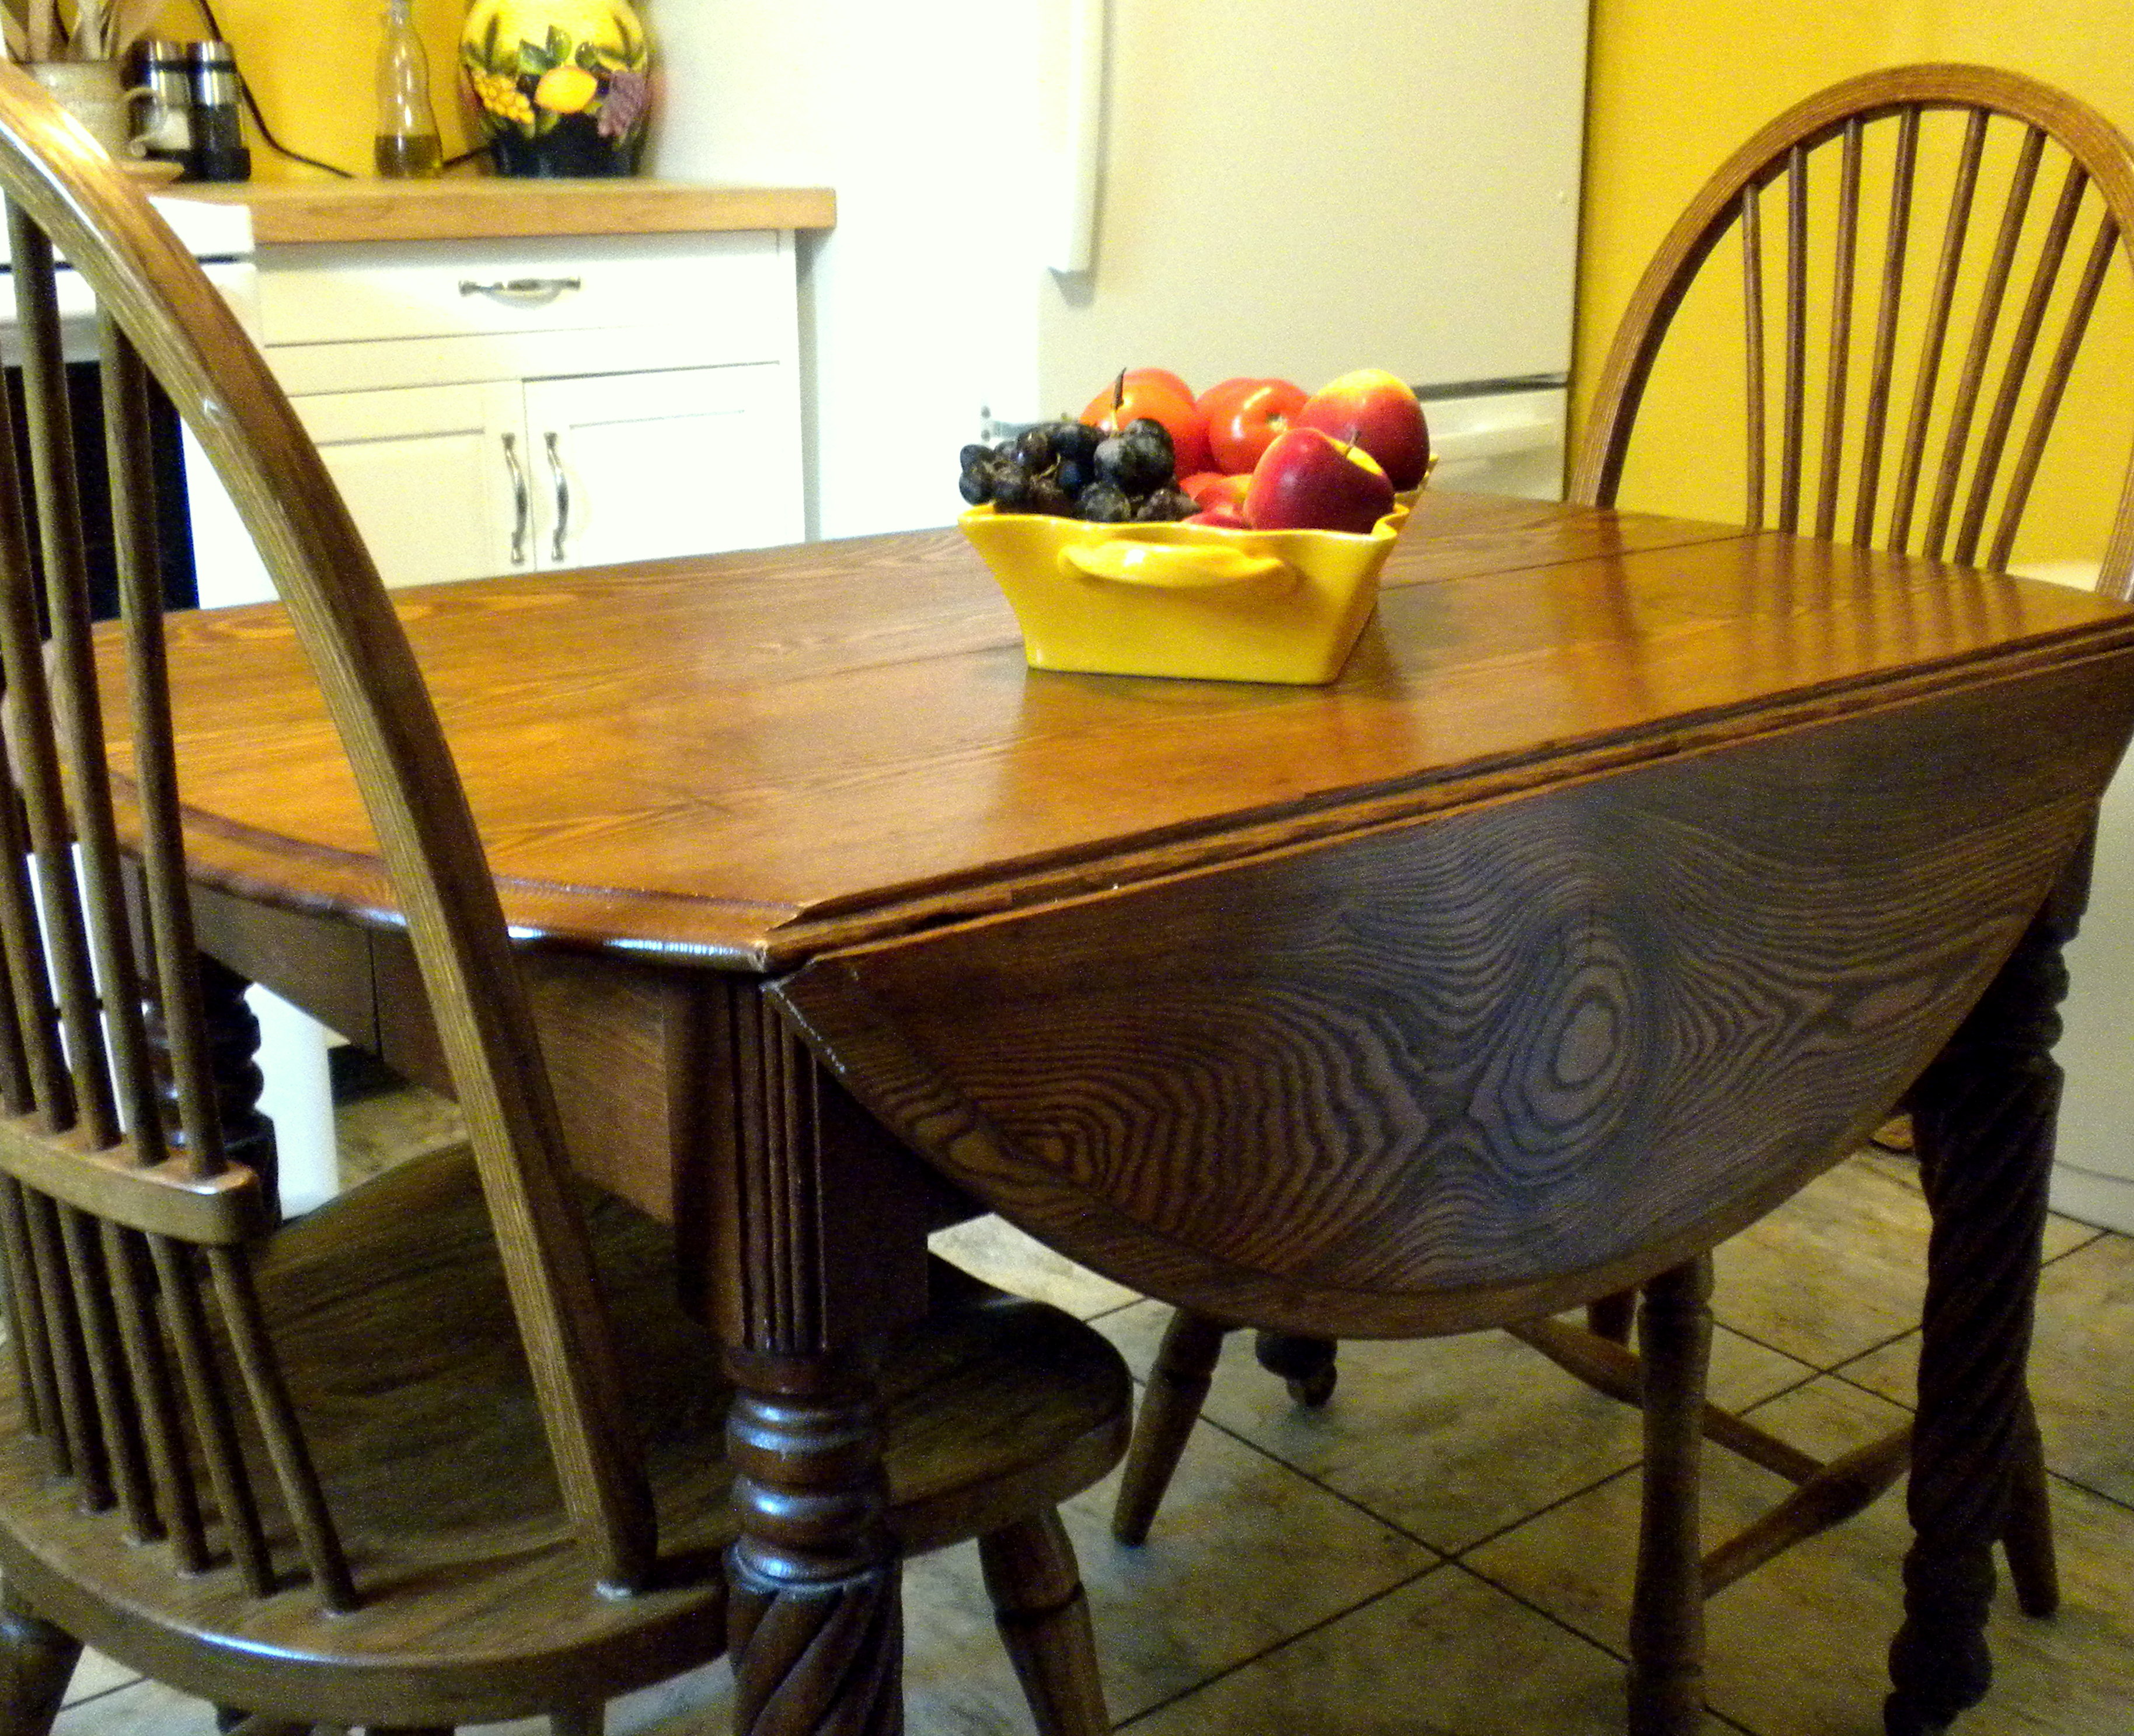 grandmother's dining room table